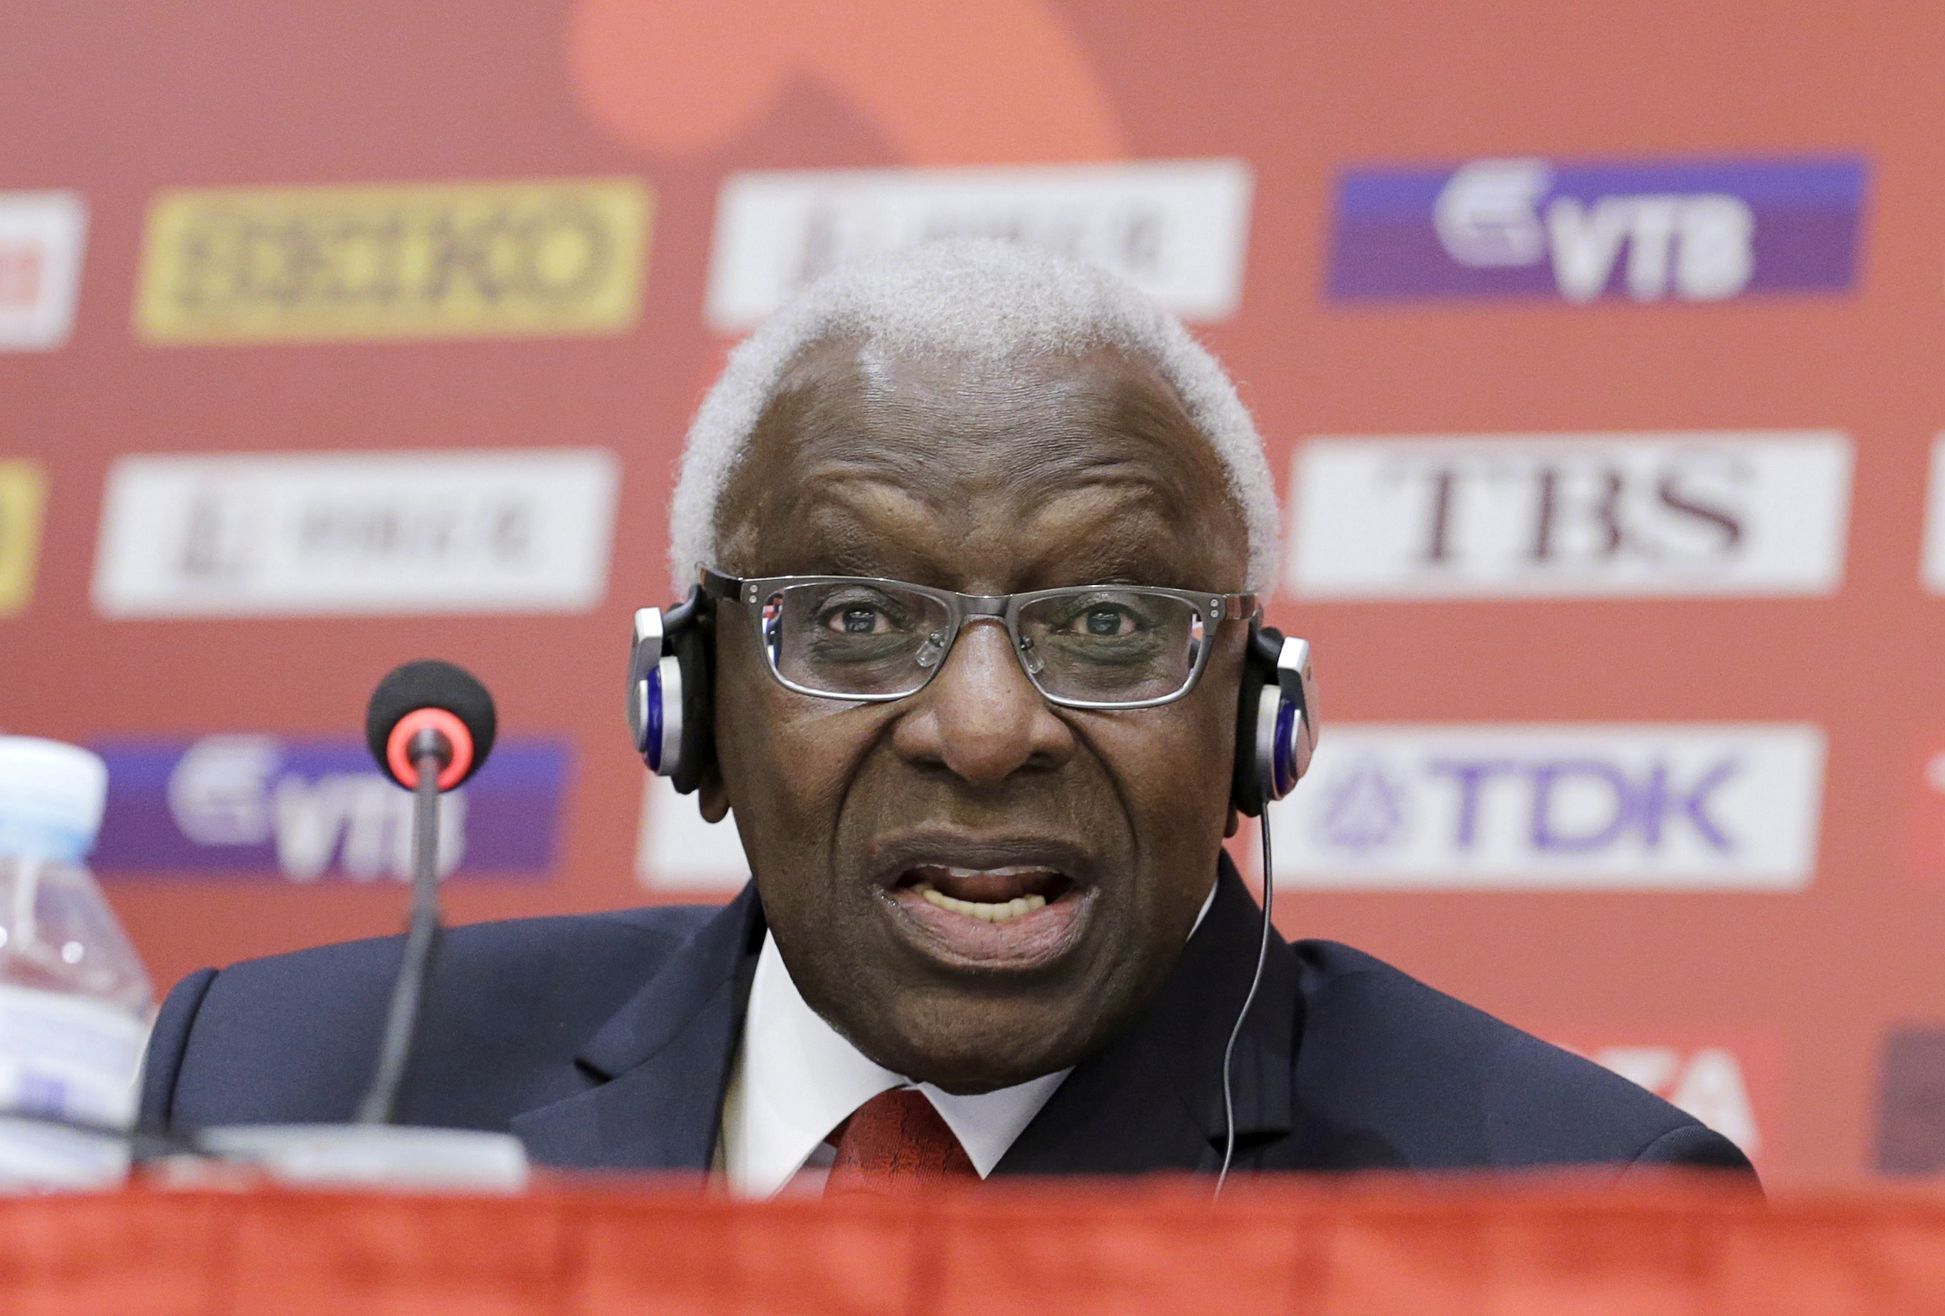 FILE PHOTO: President of International Association of Athletics Federations (IAAF) Diack answers a question at a news conference in Beijing,